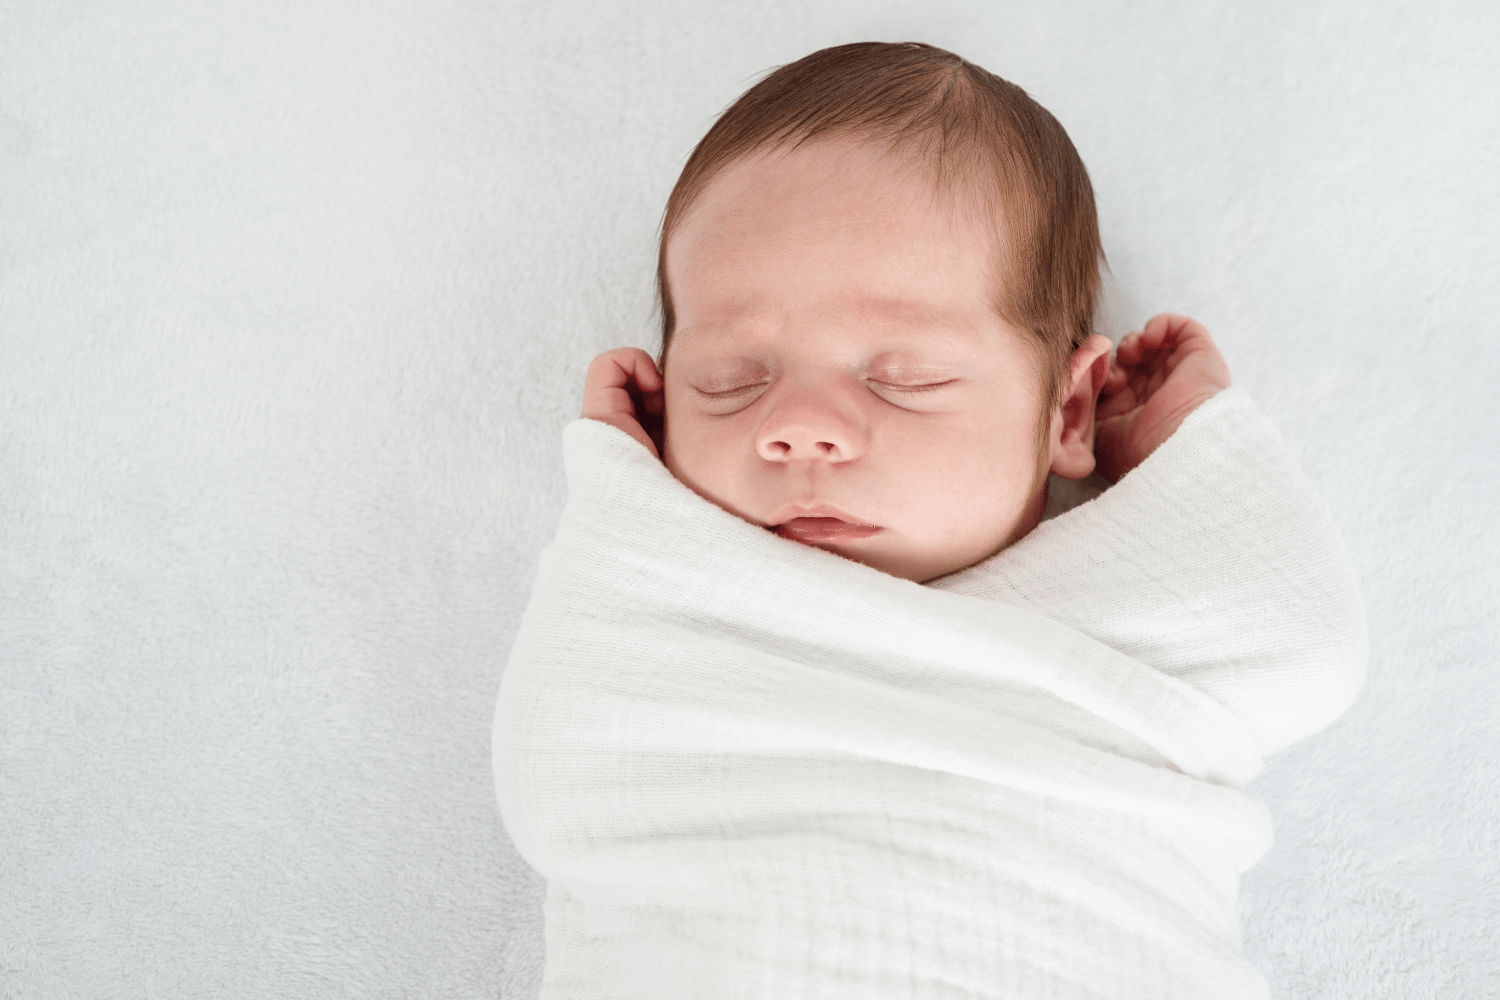 How Do I Get My Baby To Sleep Through the Night? - Zipster